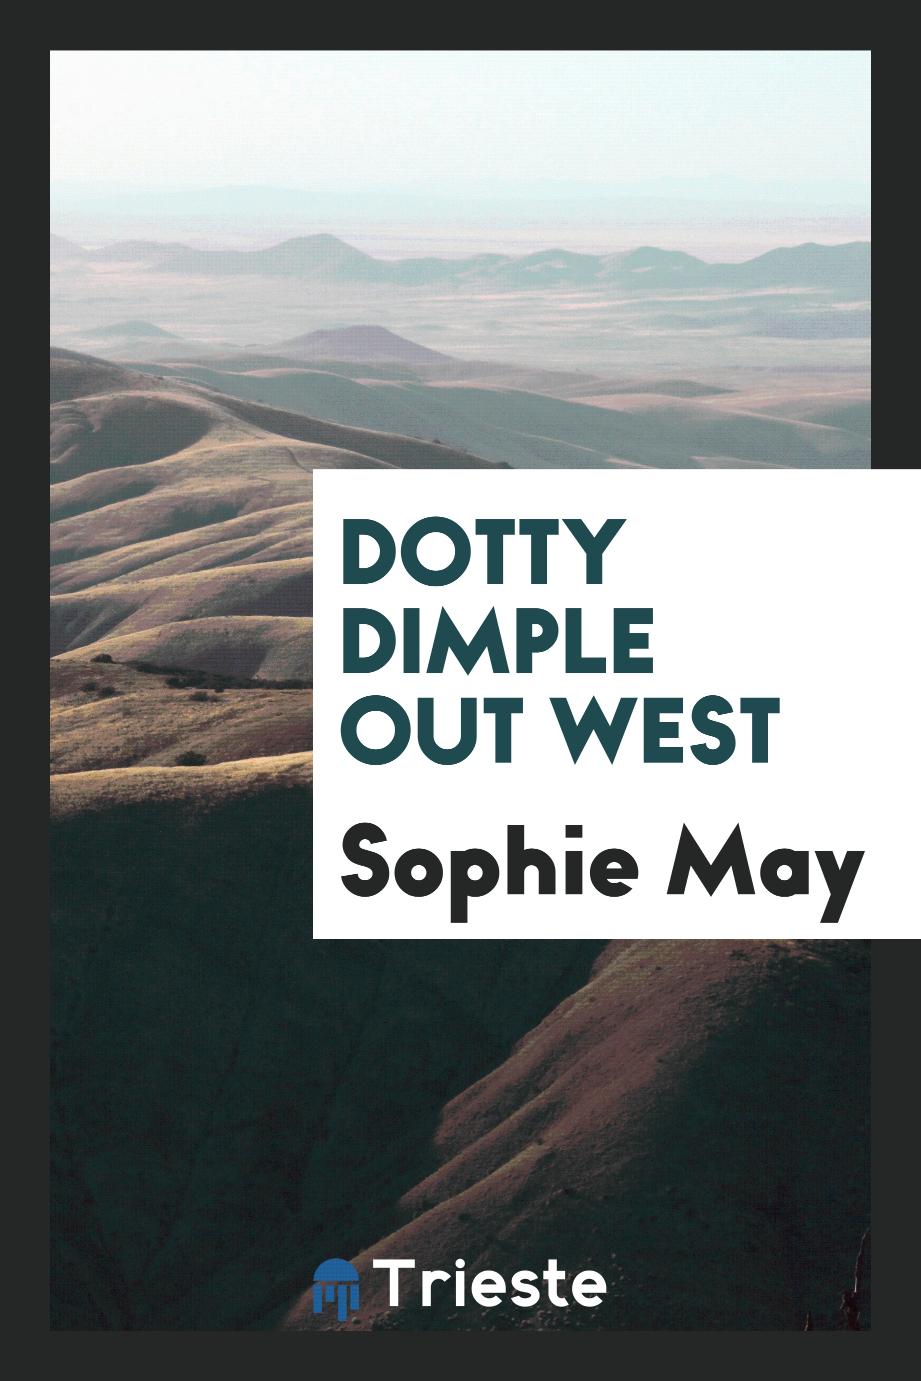 Dotty Dimple out West